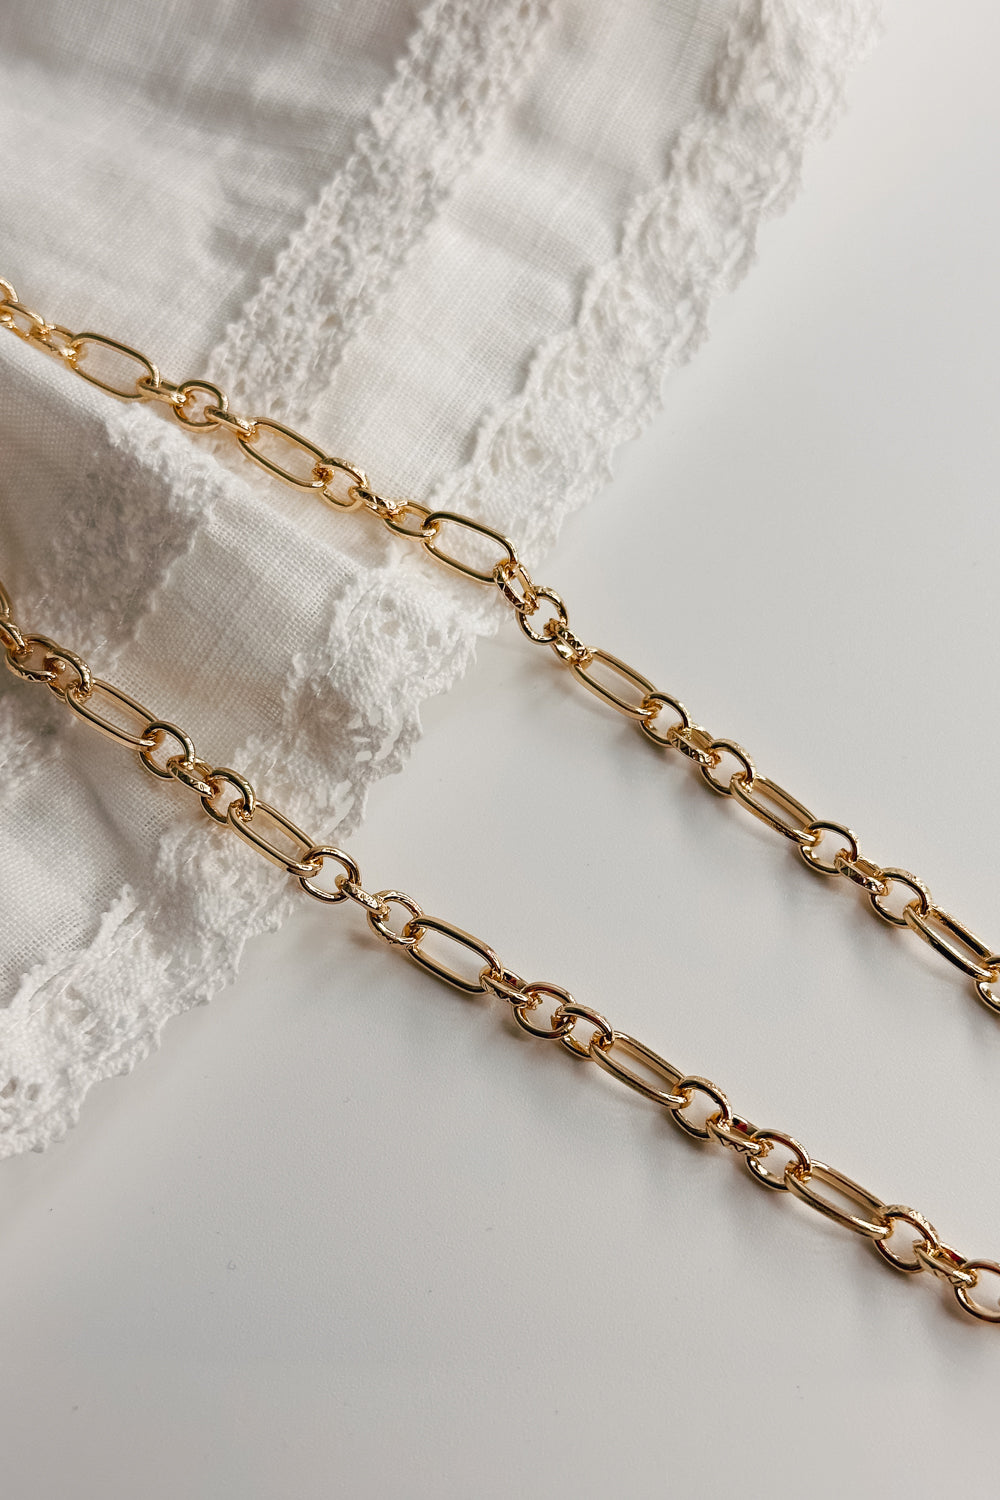 Image shows the Kennedy Gold Chain Link Necklace against a white background. Necklace has gold circle and oval links. Shown without charms.